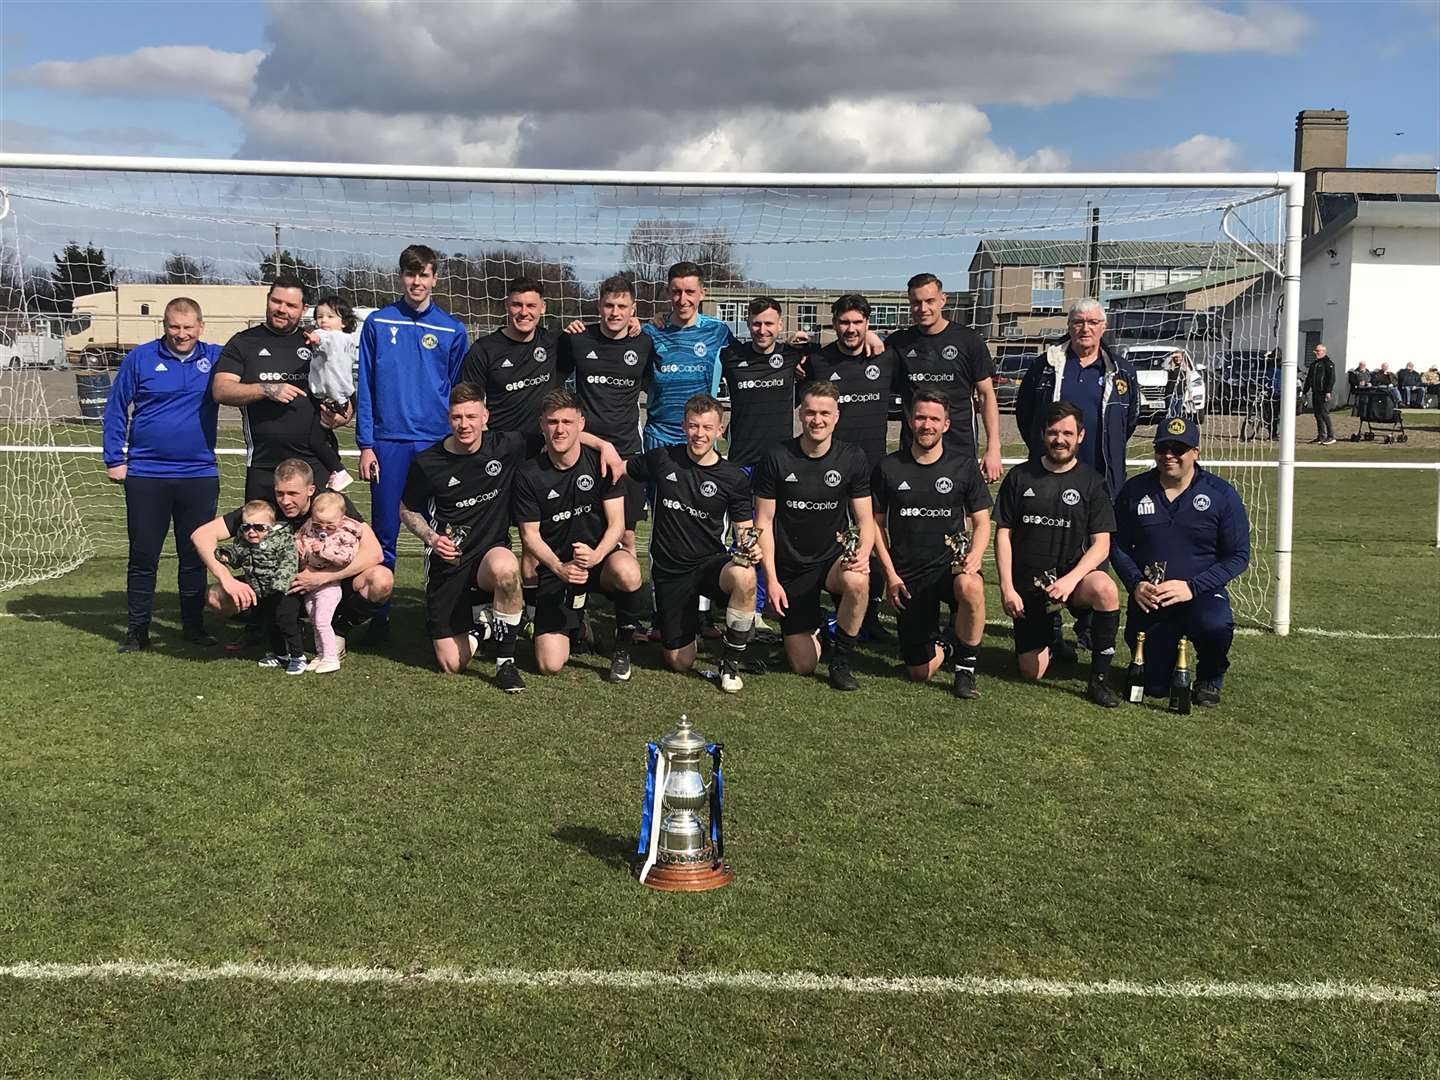 Invergordon qualified for this season's Scottish Cup by winning the North Caledonian League. Picture: Will Clark